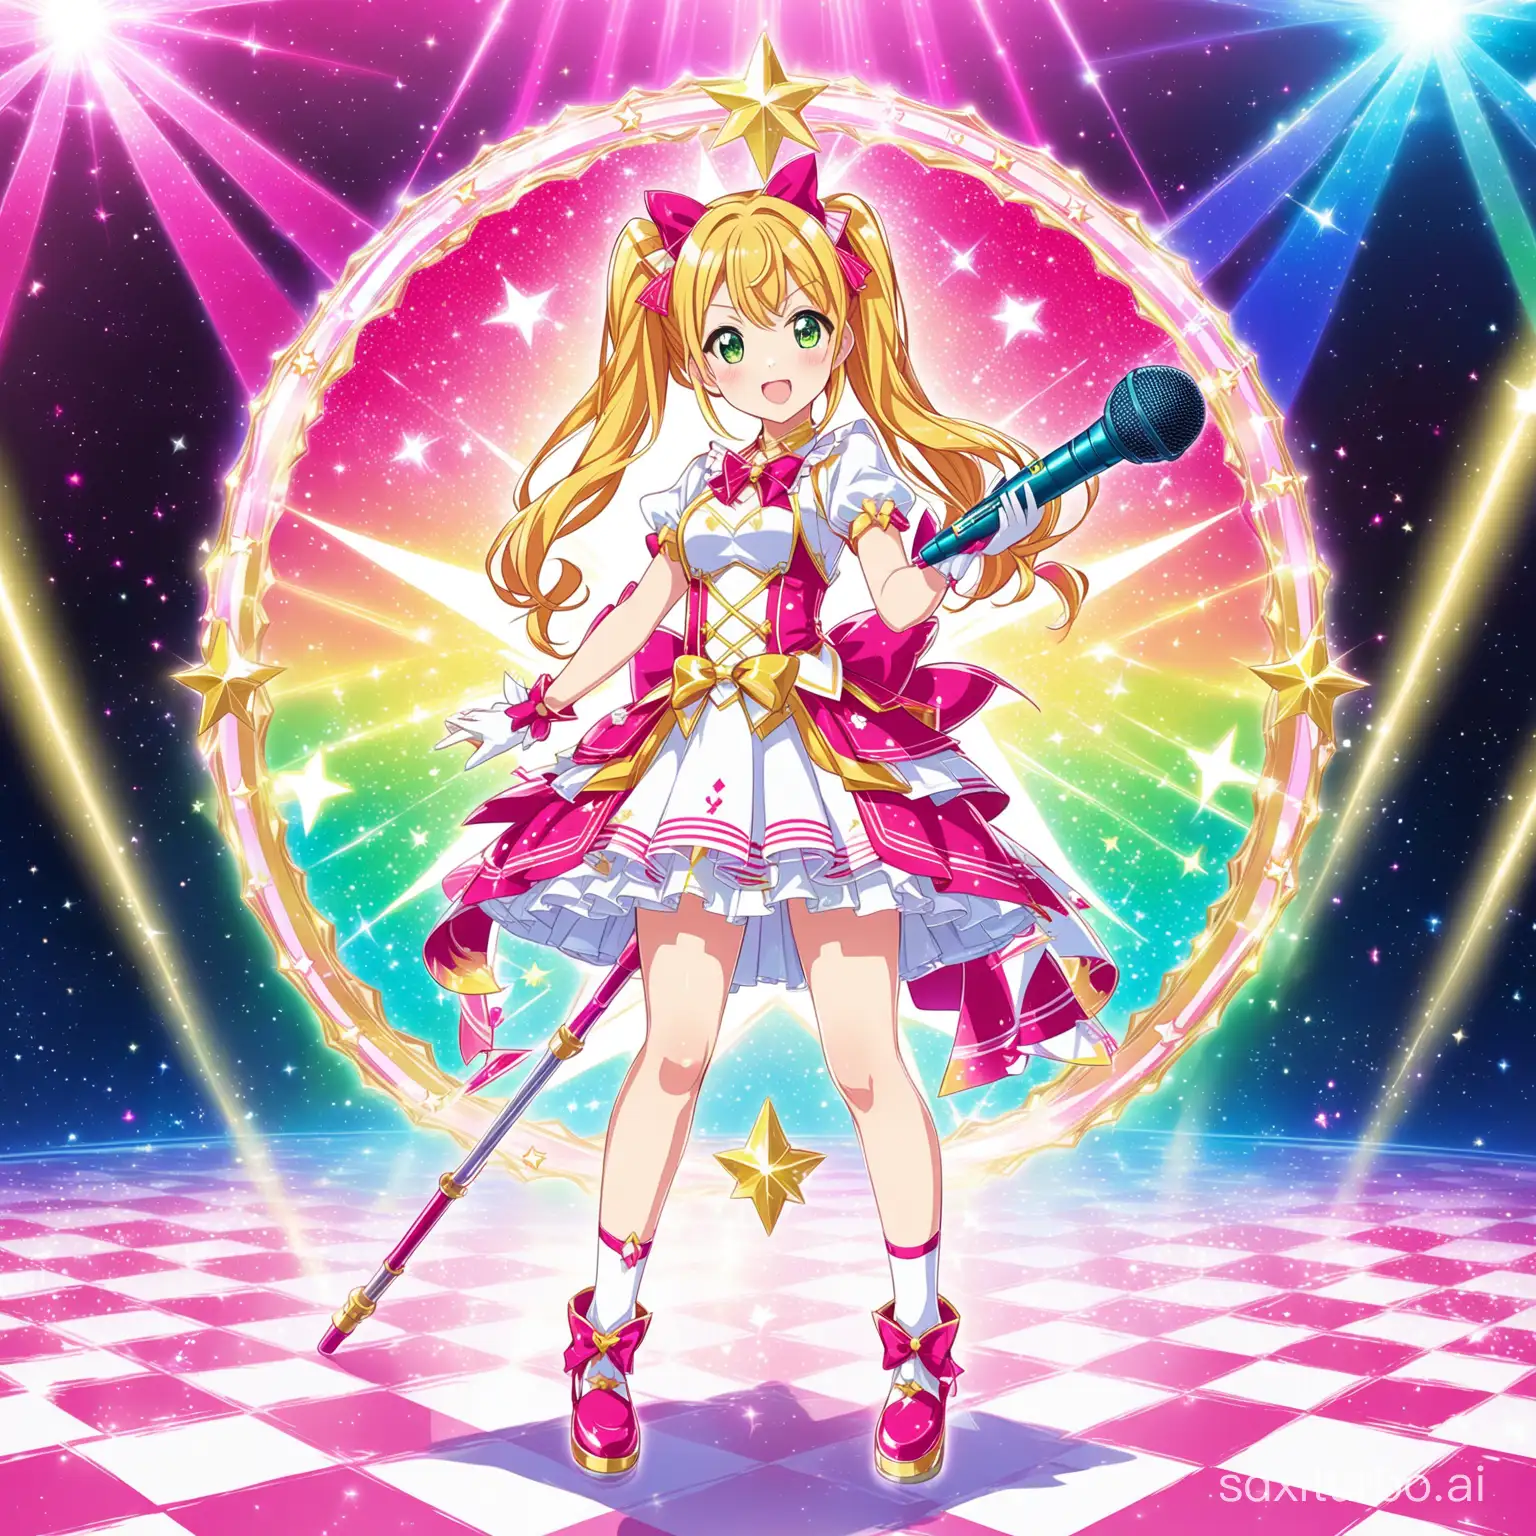 Magical-Idol-Anime-Girl-with-Microphone-Stand-on-Checkered-Floor